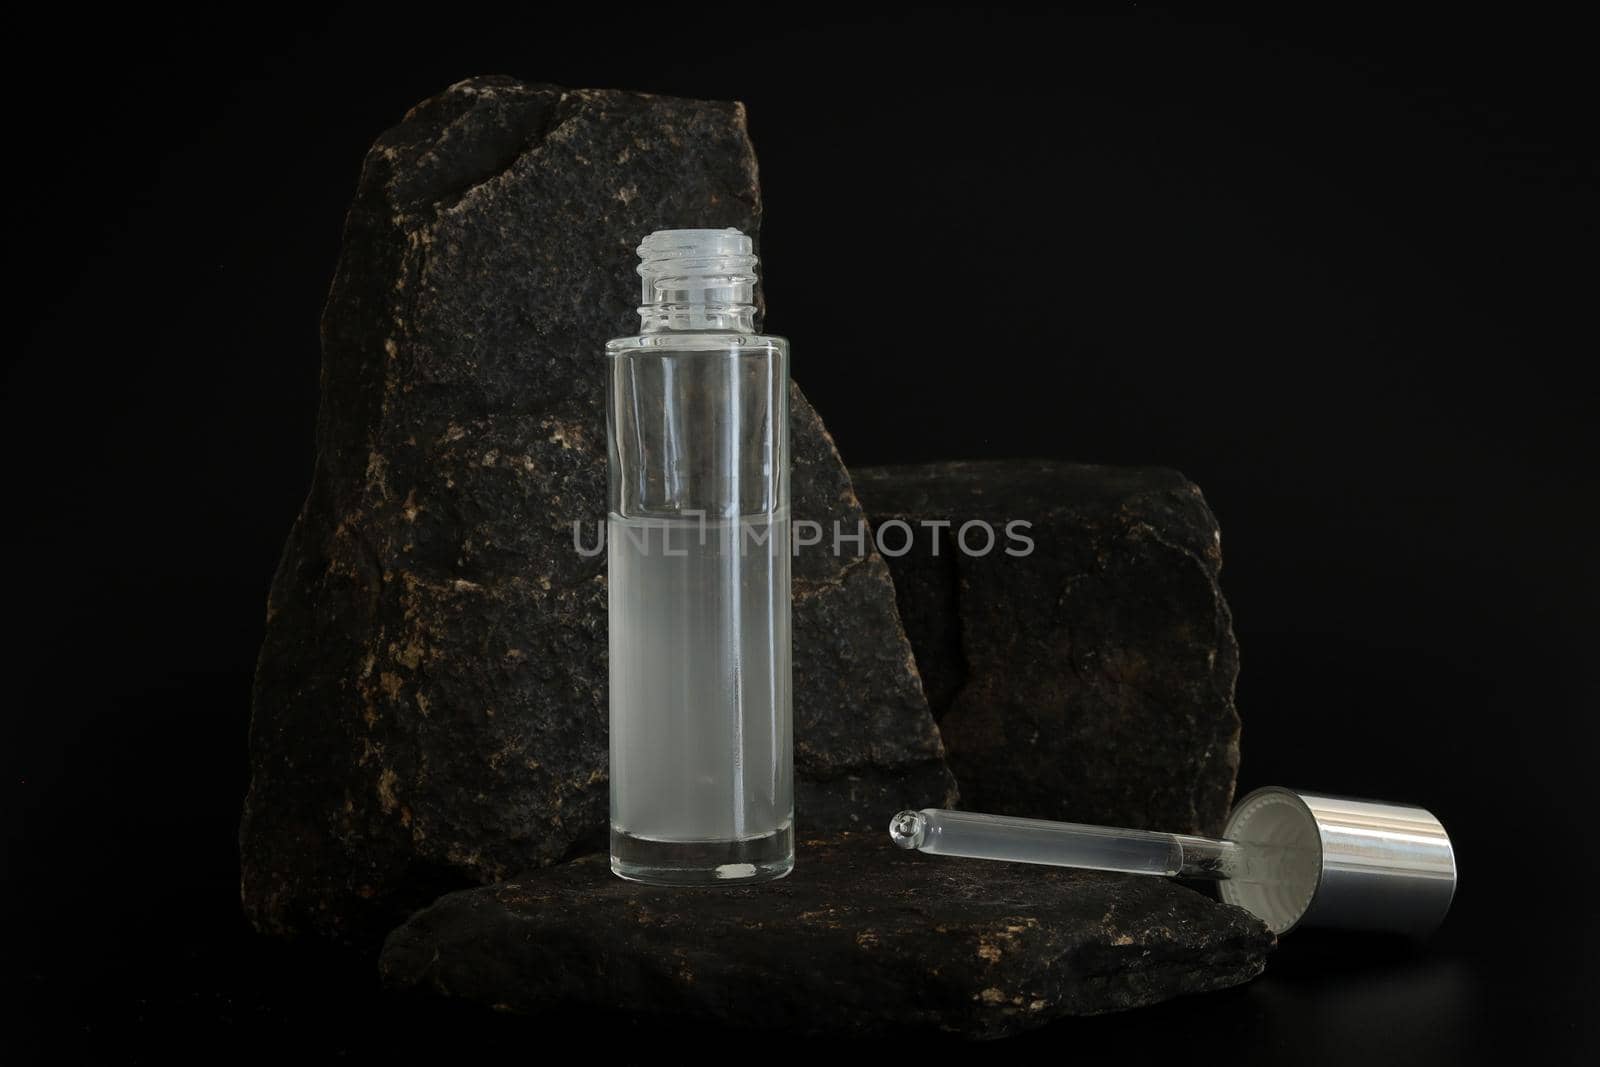 Unbranded natural cosmetic serum packaging standing on stone podium. Serum presentation on the black background. Mockup. Trending concept in natural materials. Natural cosmetic, skincare